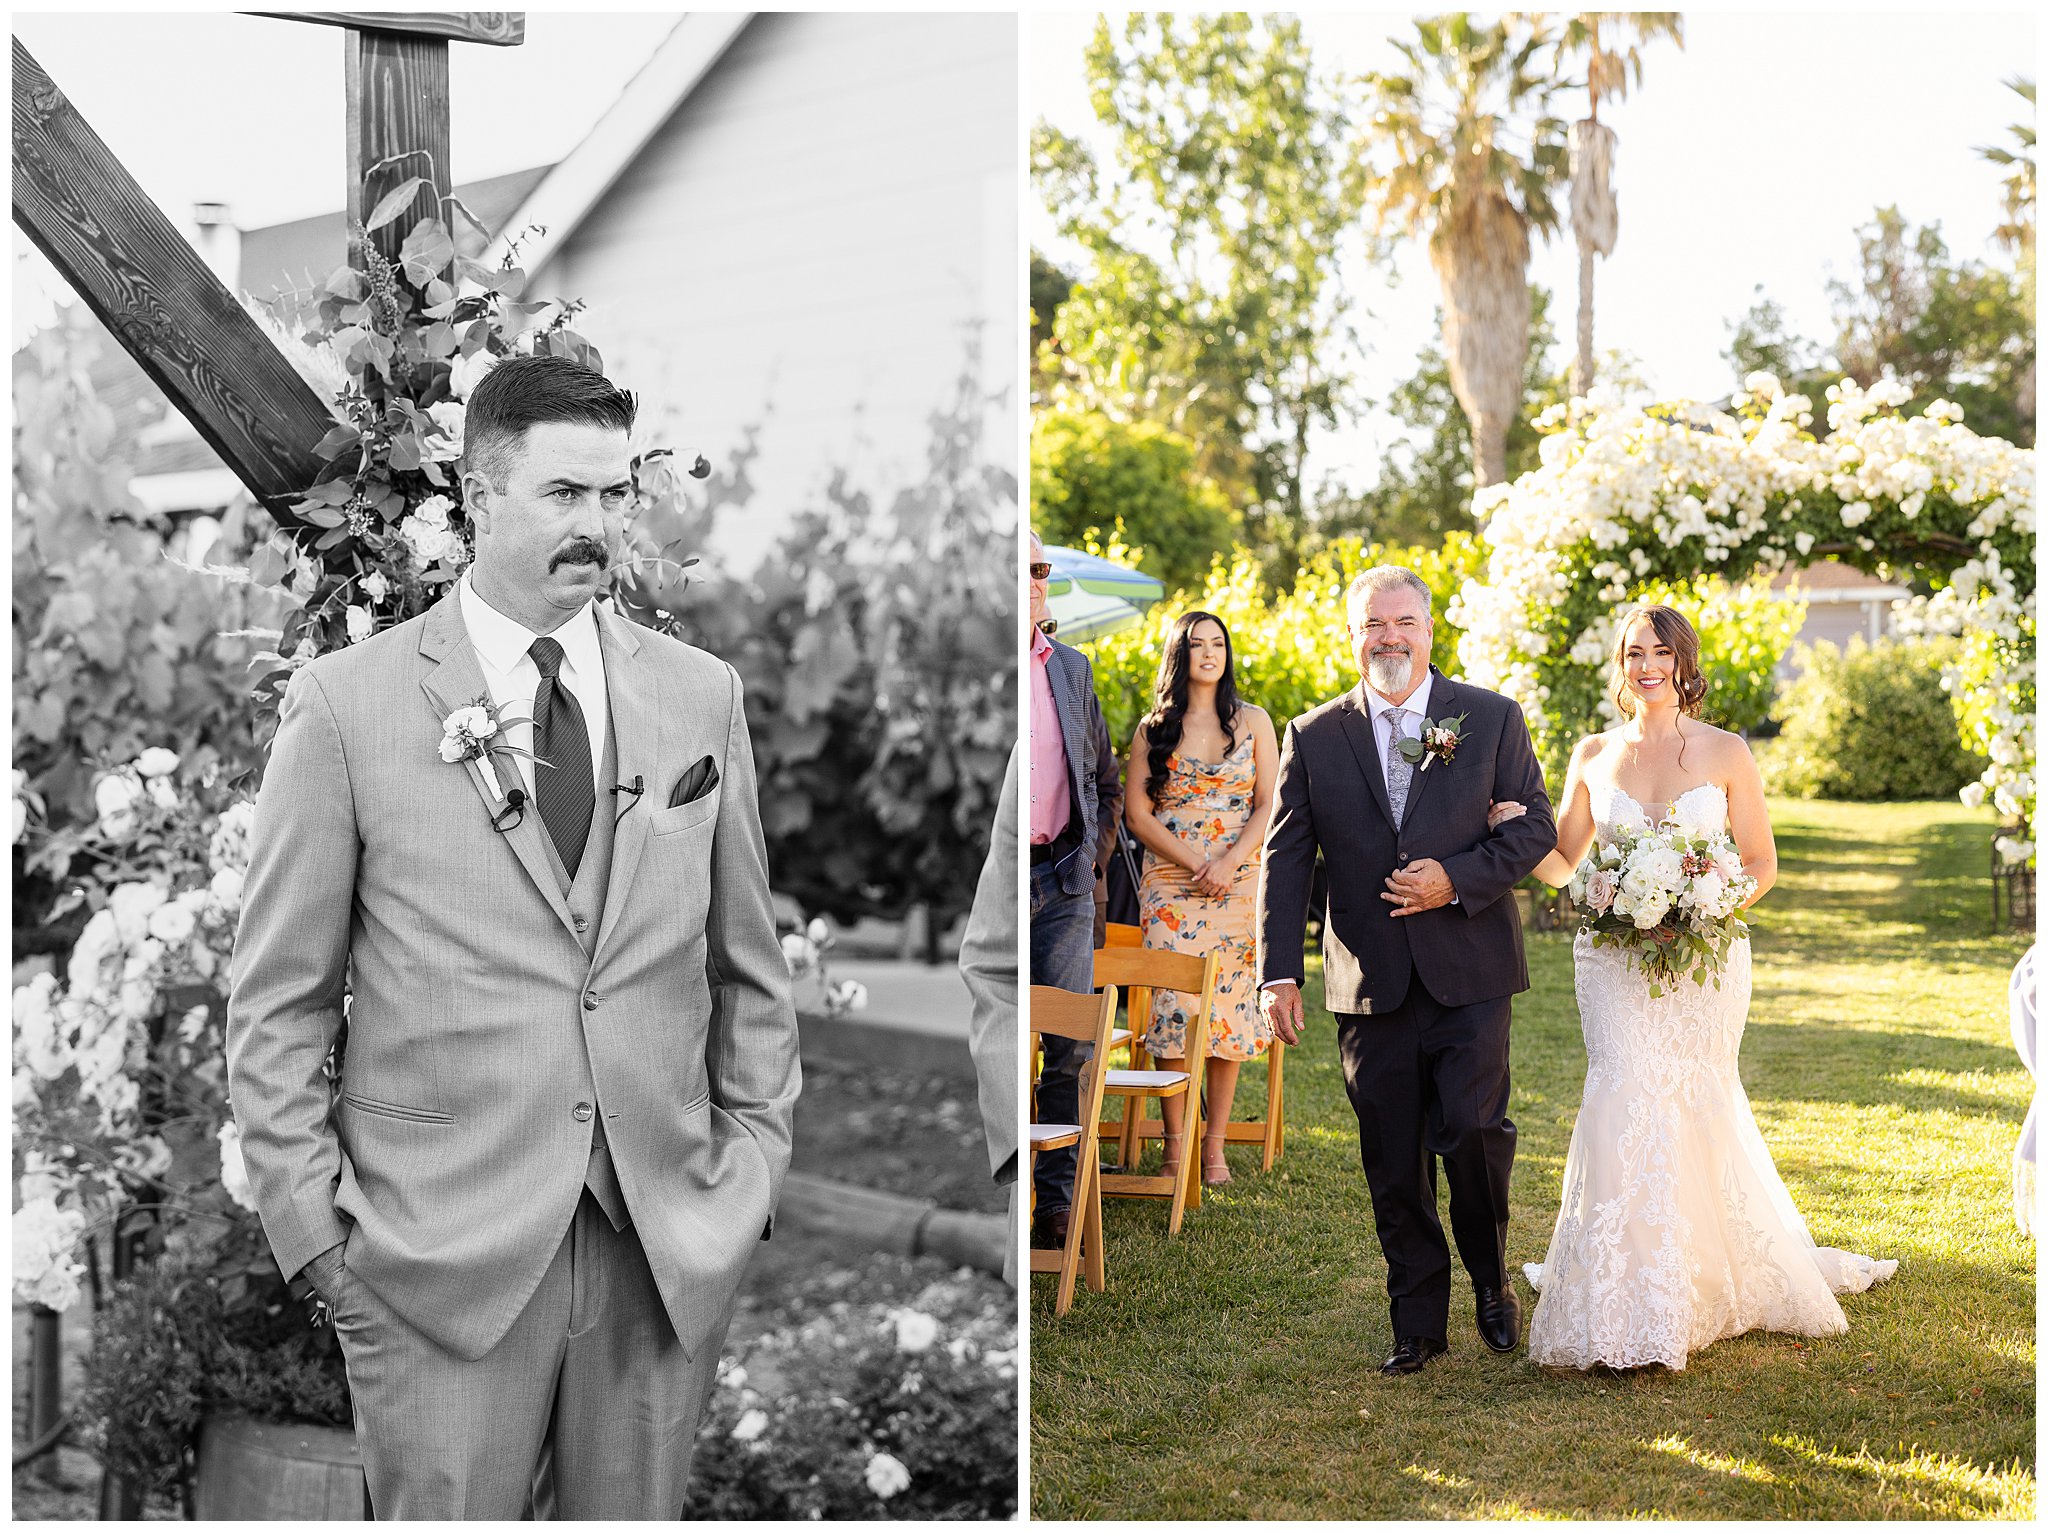 Scribner Bend Vineyard Wedding Sacramento CA Roses Arch Dusty Rose Grapevines Sunset Tent Garden Father Daughter First Look Gray Suits,